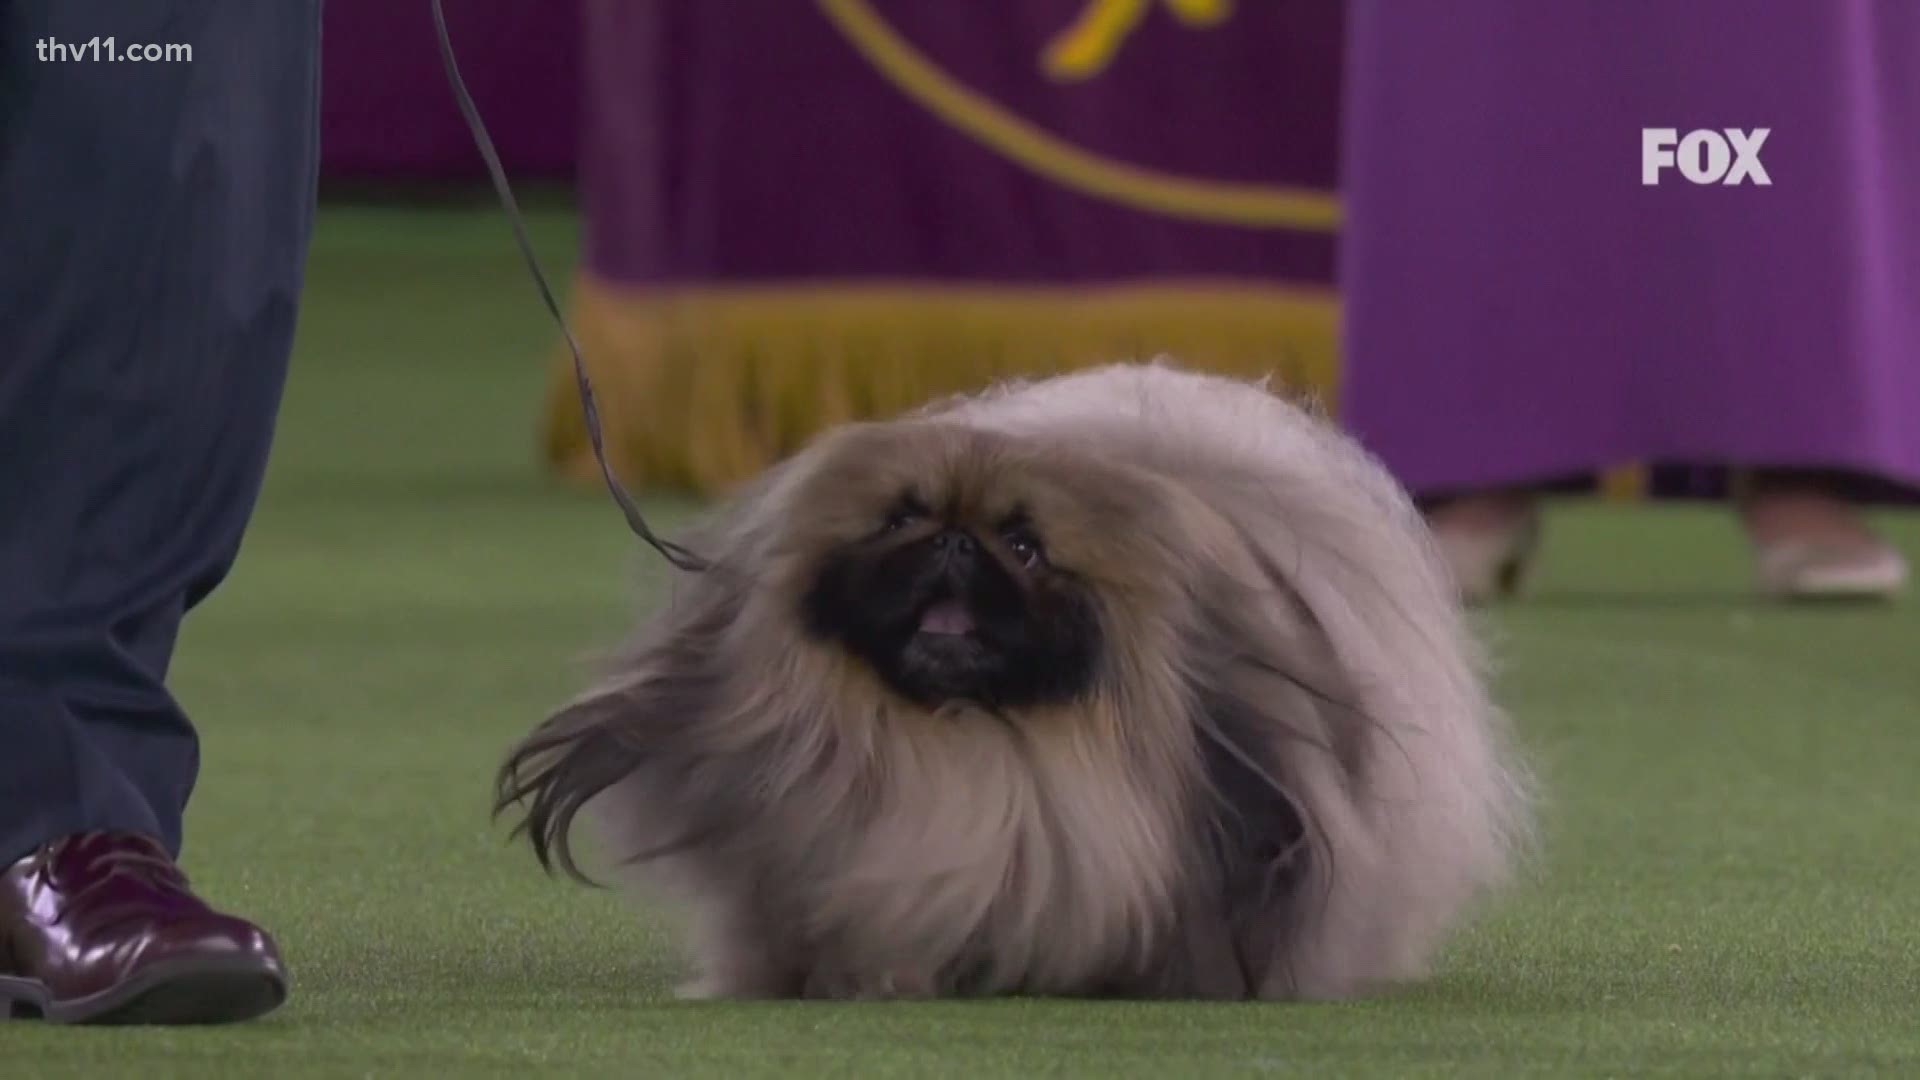 The flavor of the year at the Westminster Kennel Club dog show: Wasabi.